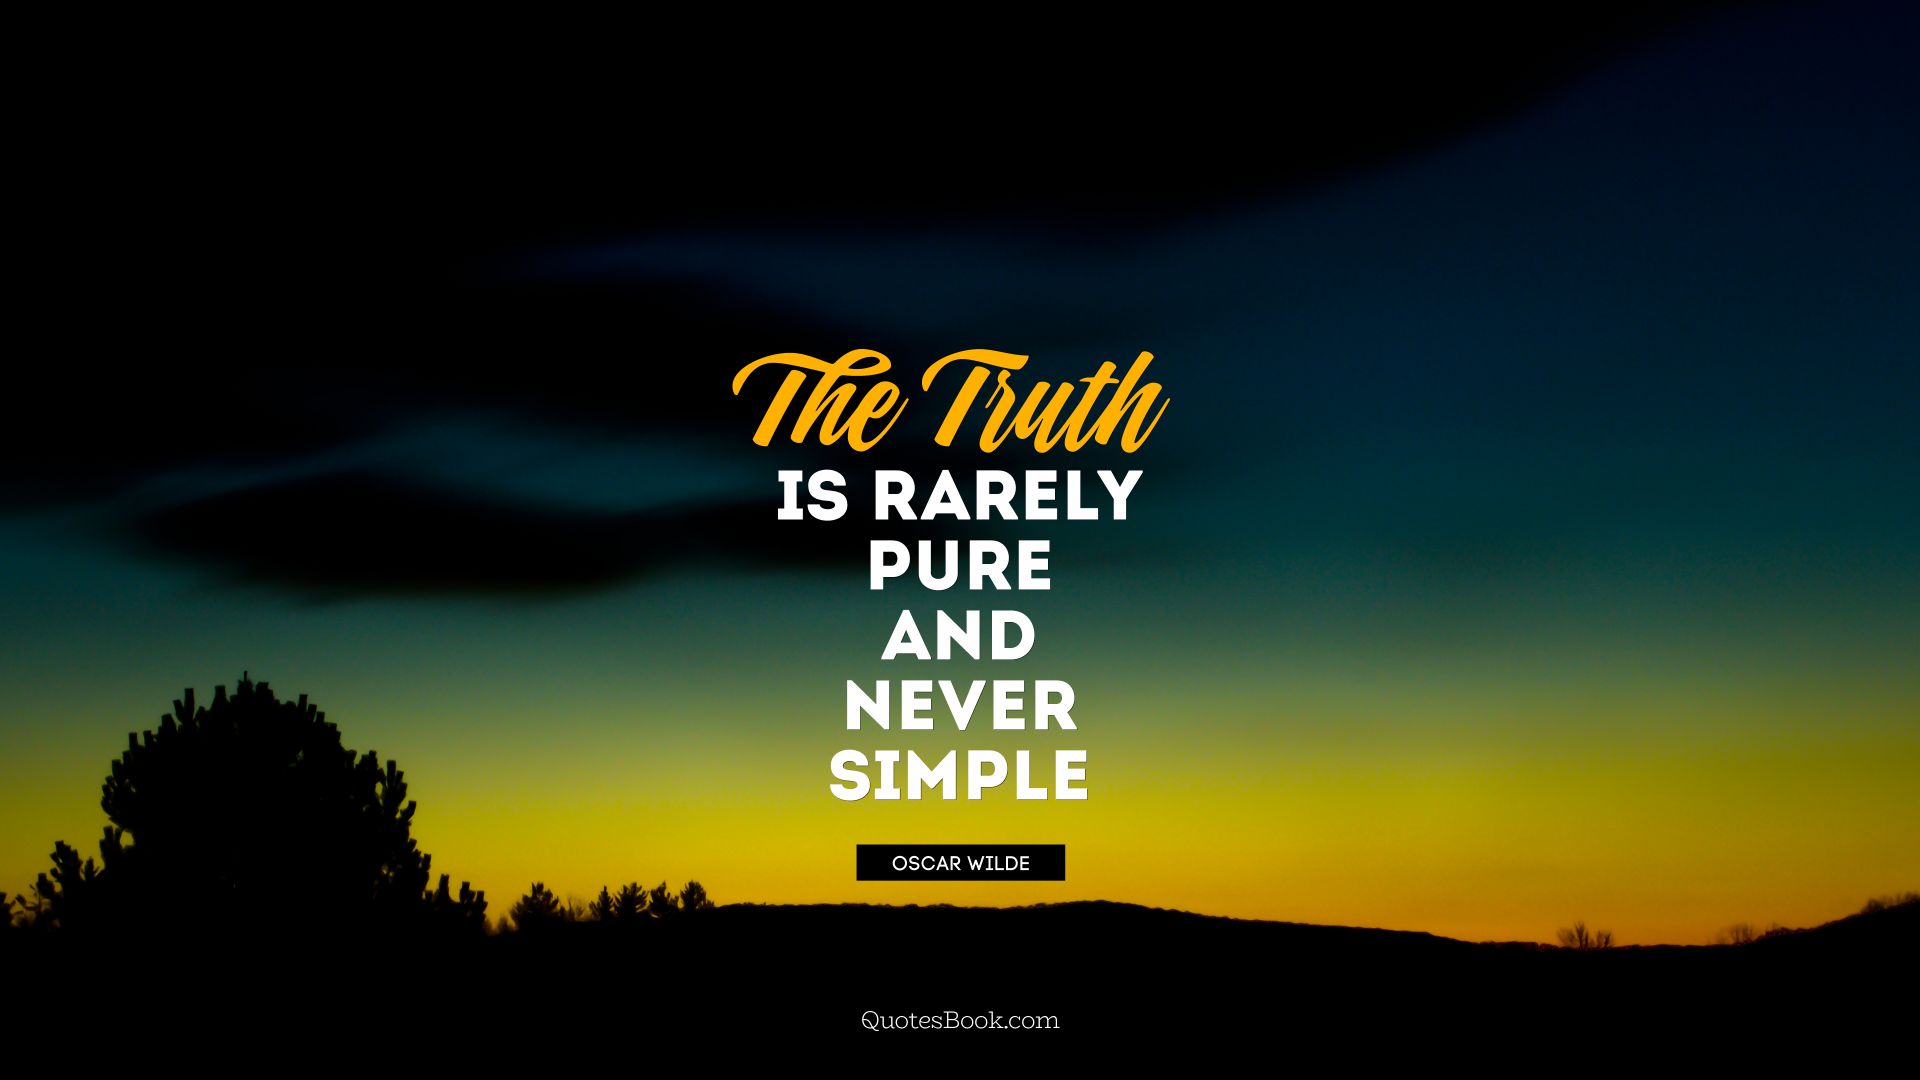 The truth is rarely pure and never simple. - Quote by Oscar Wilde